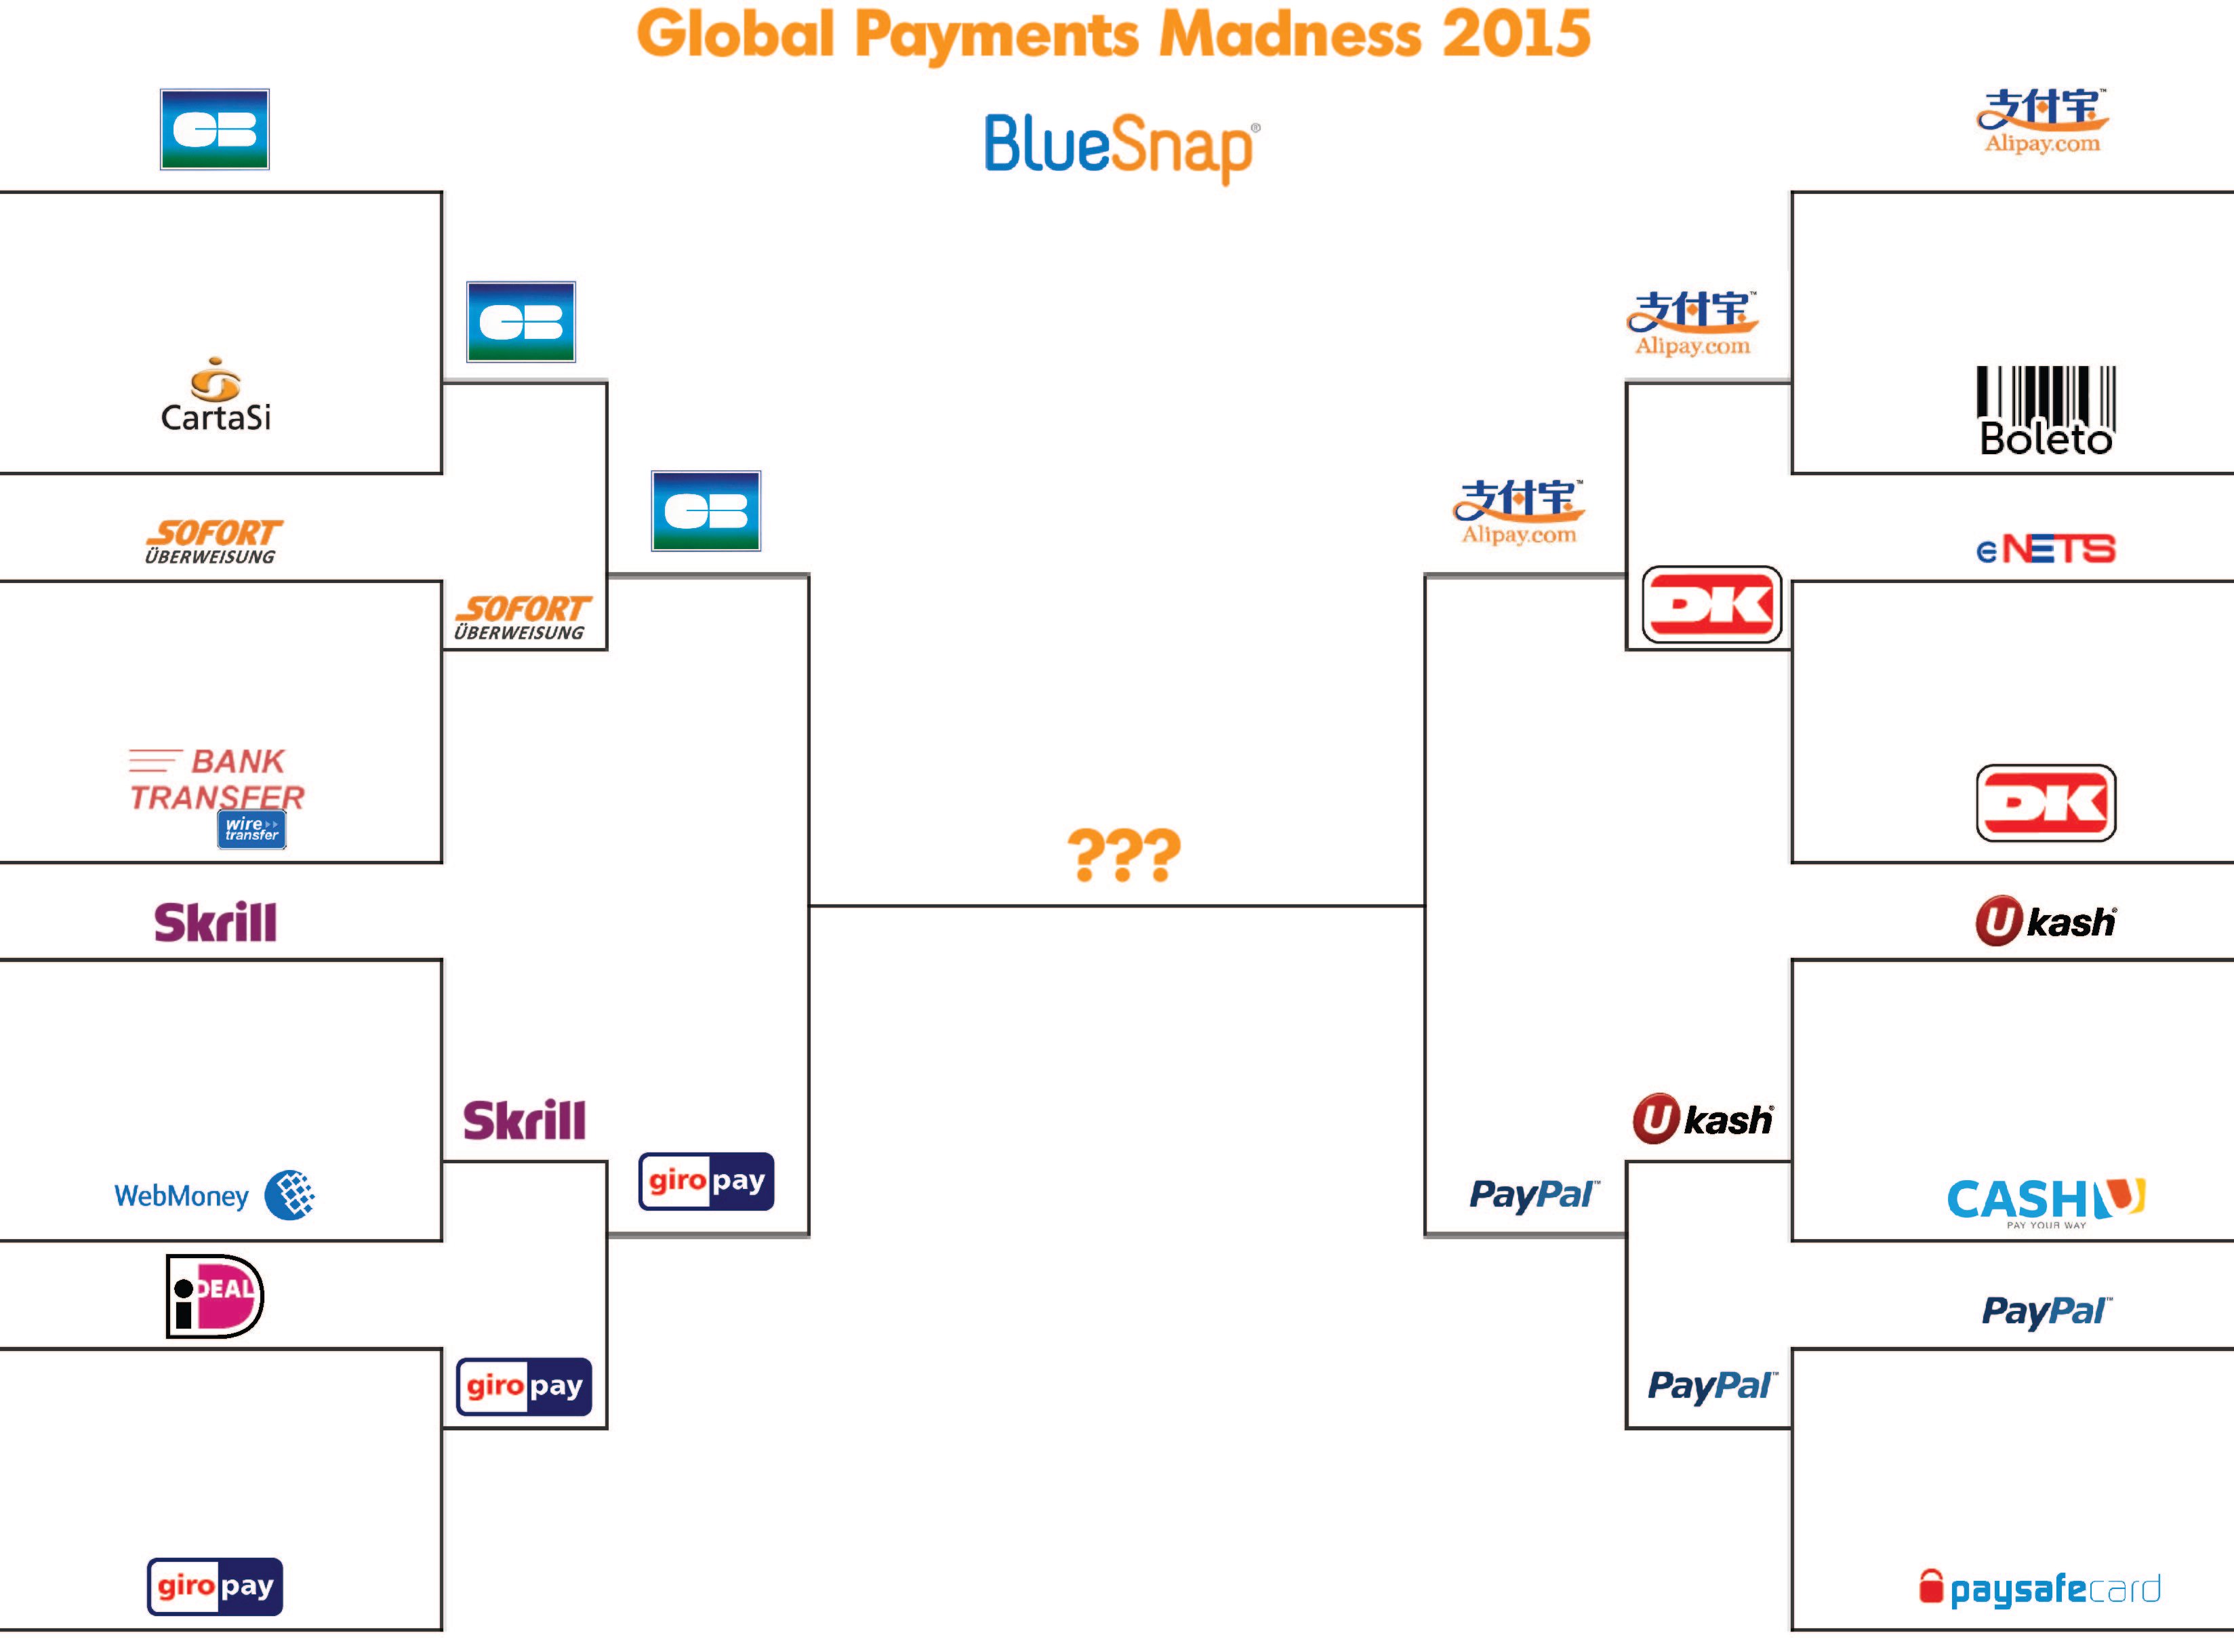 Global Payments Madness 2015